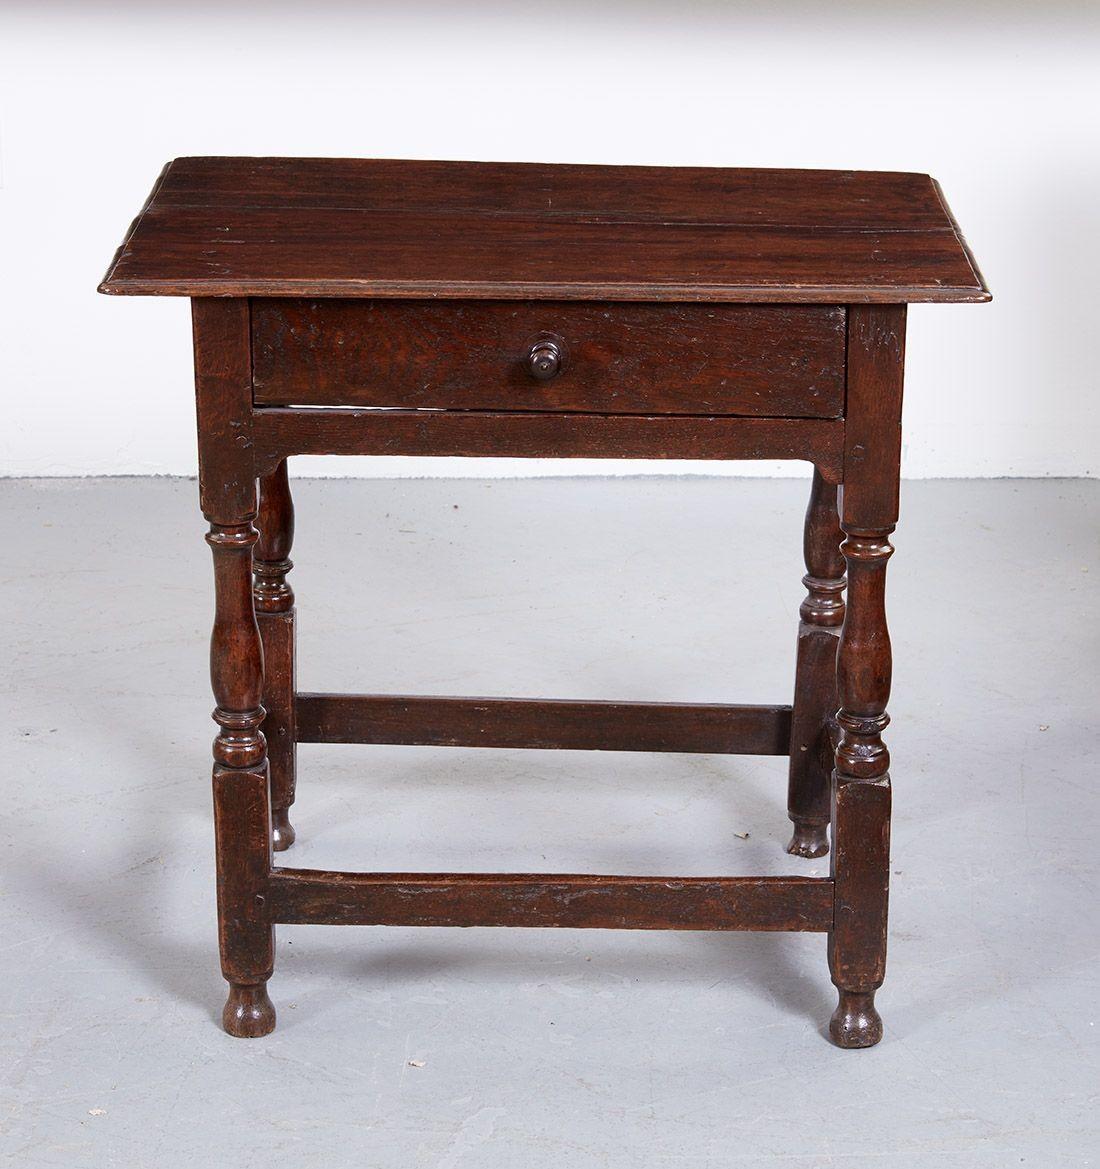 Early 18th century English oak single drawer side table, with thumb molded top over single drawer with wooden pull, over balustrade turned legs joined by box stretcher base.  Useful as an end table or as a bedside table.  